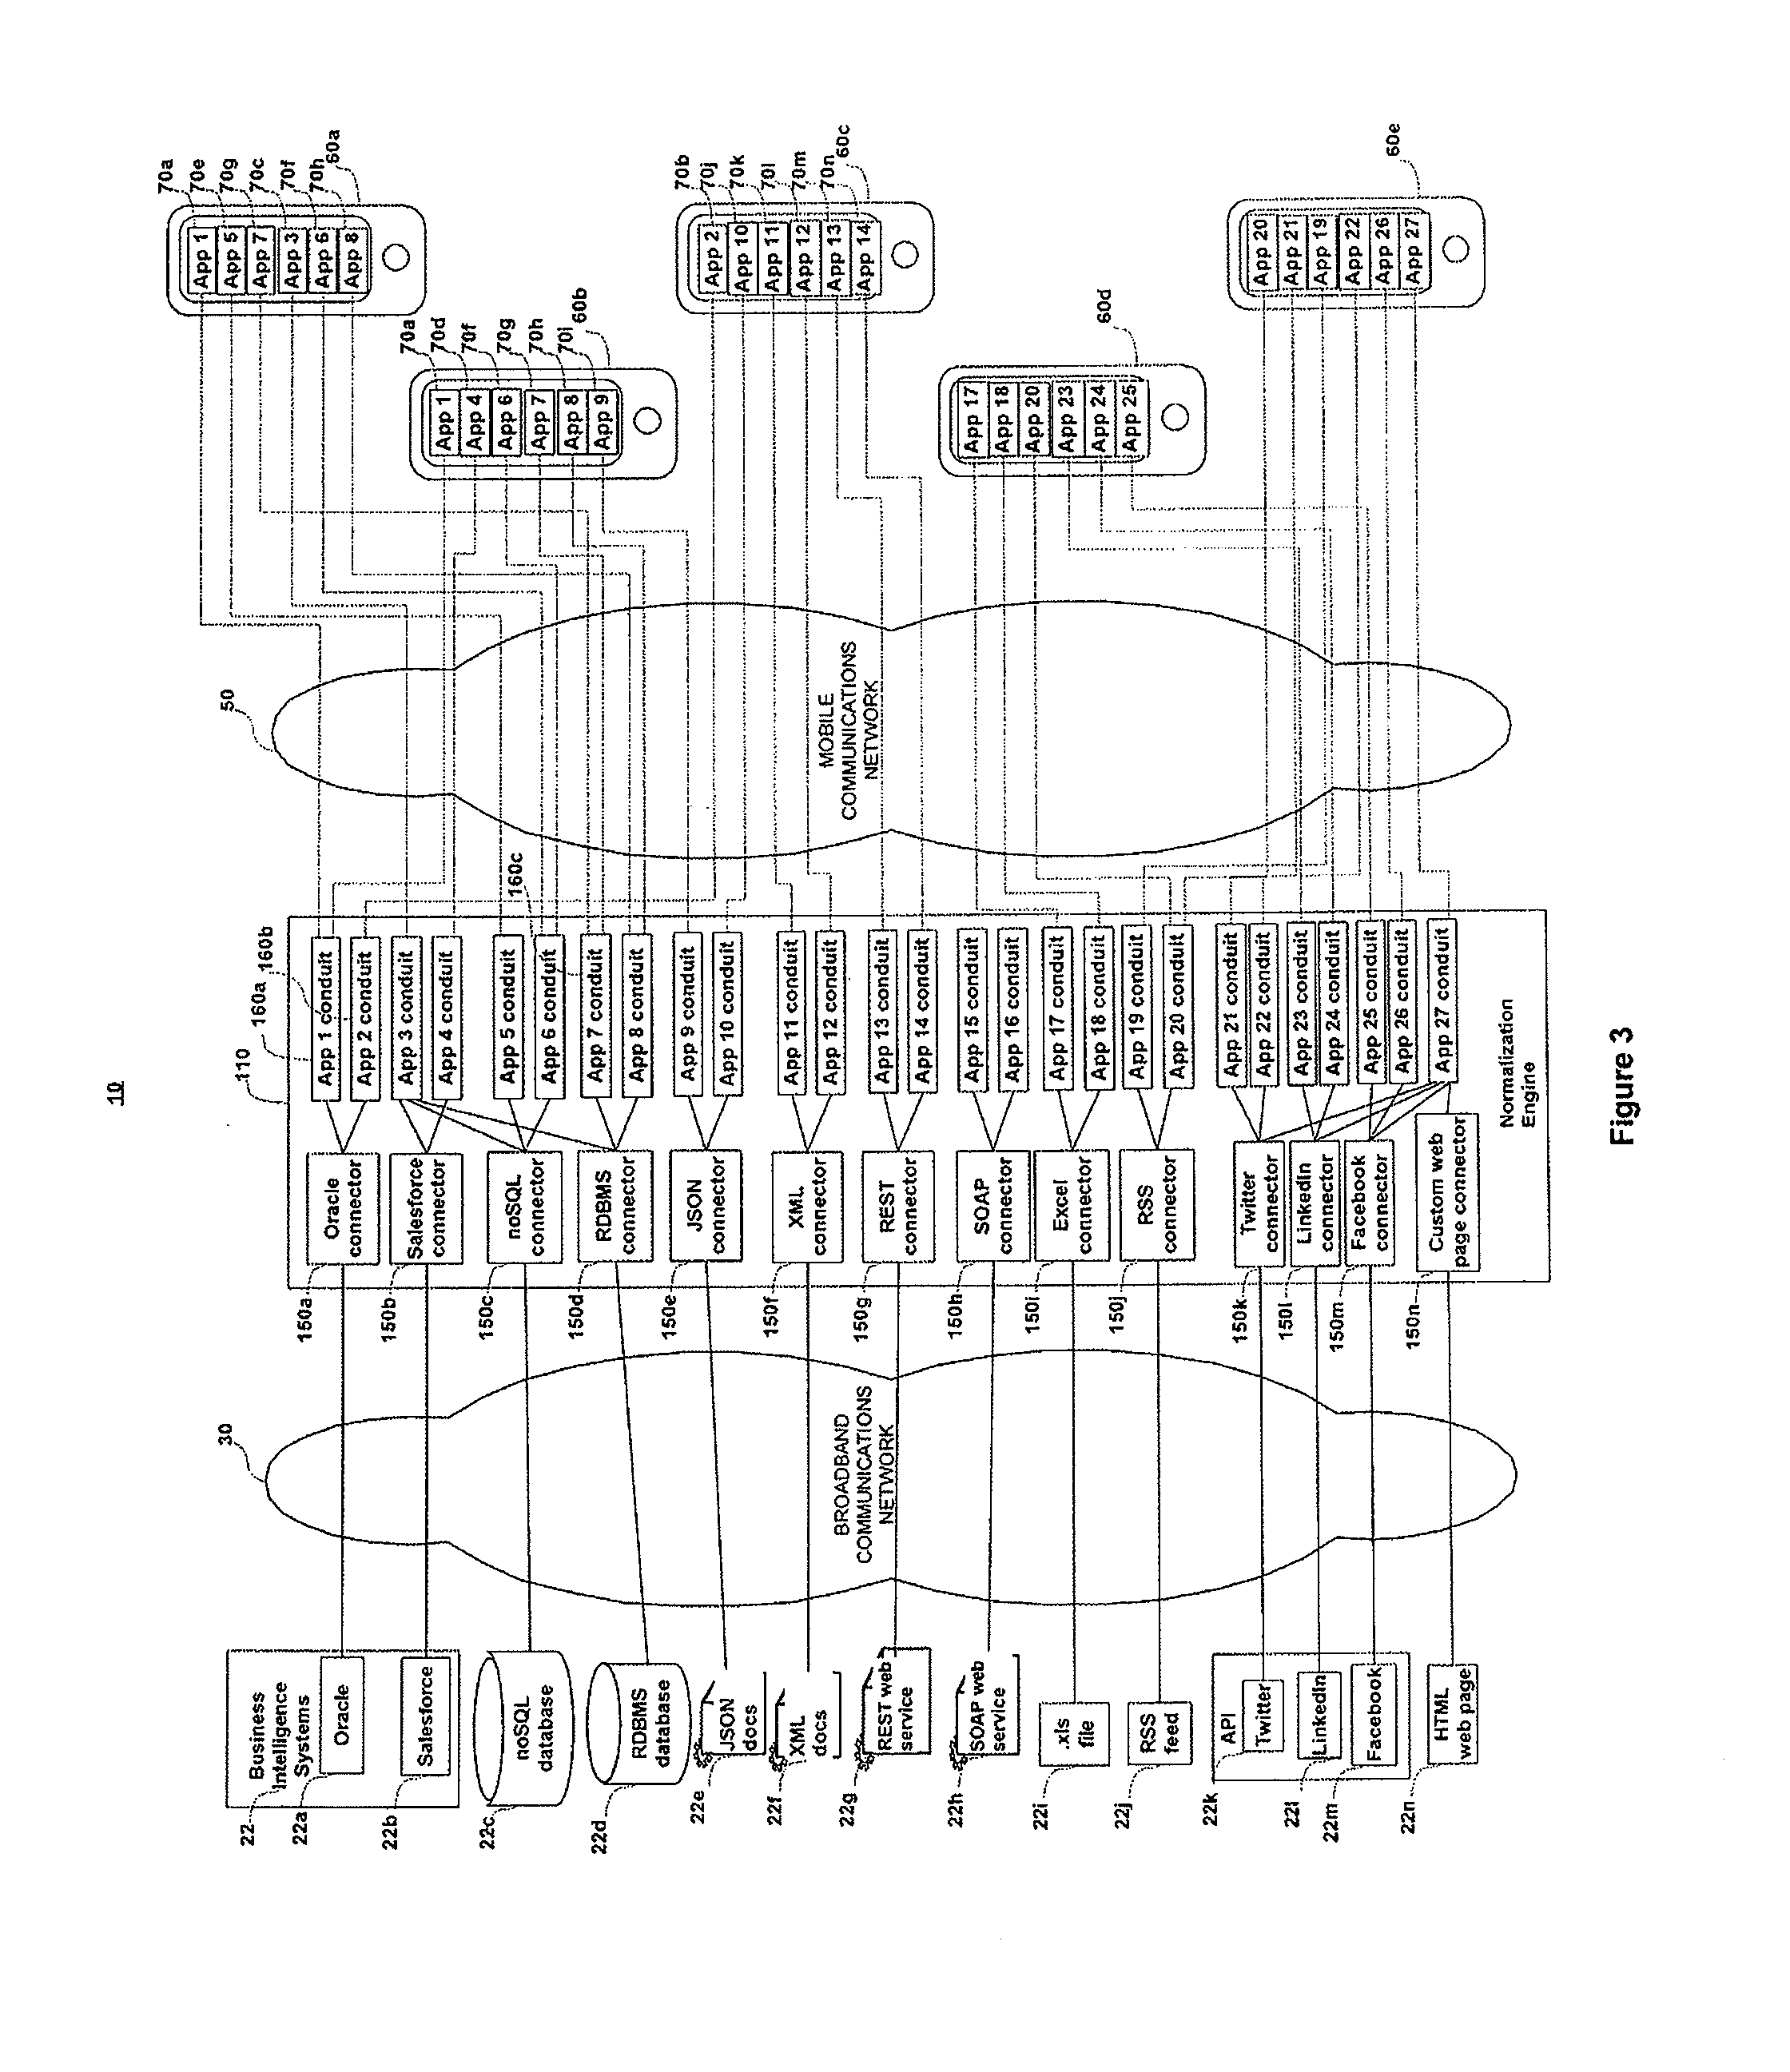 System and method for efficient data exchange in a multi-platform network of heterogeneous devices